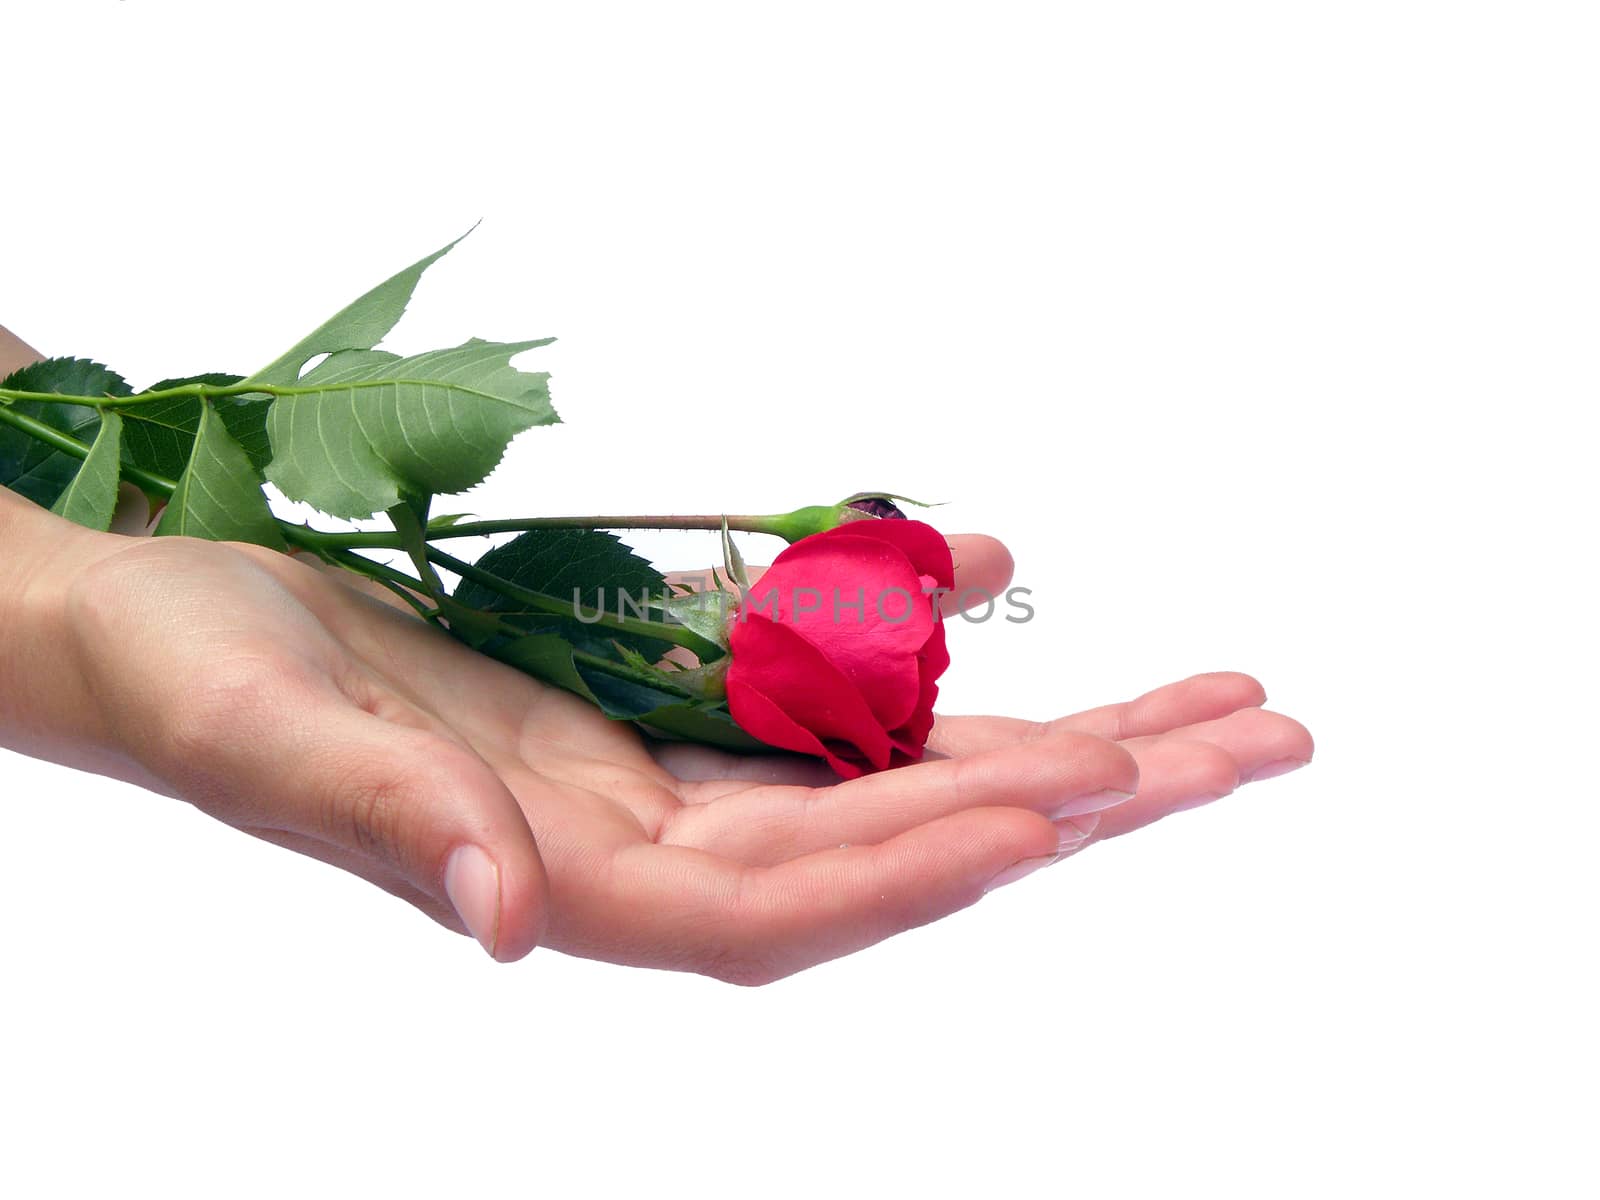 A beautiful single rose held in the hand.  